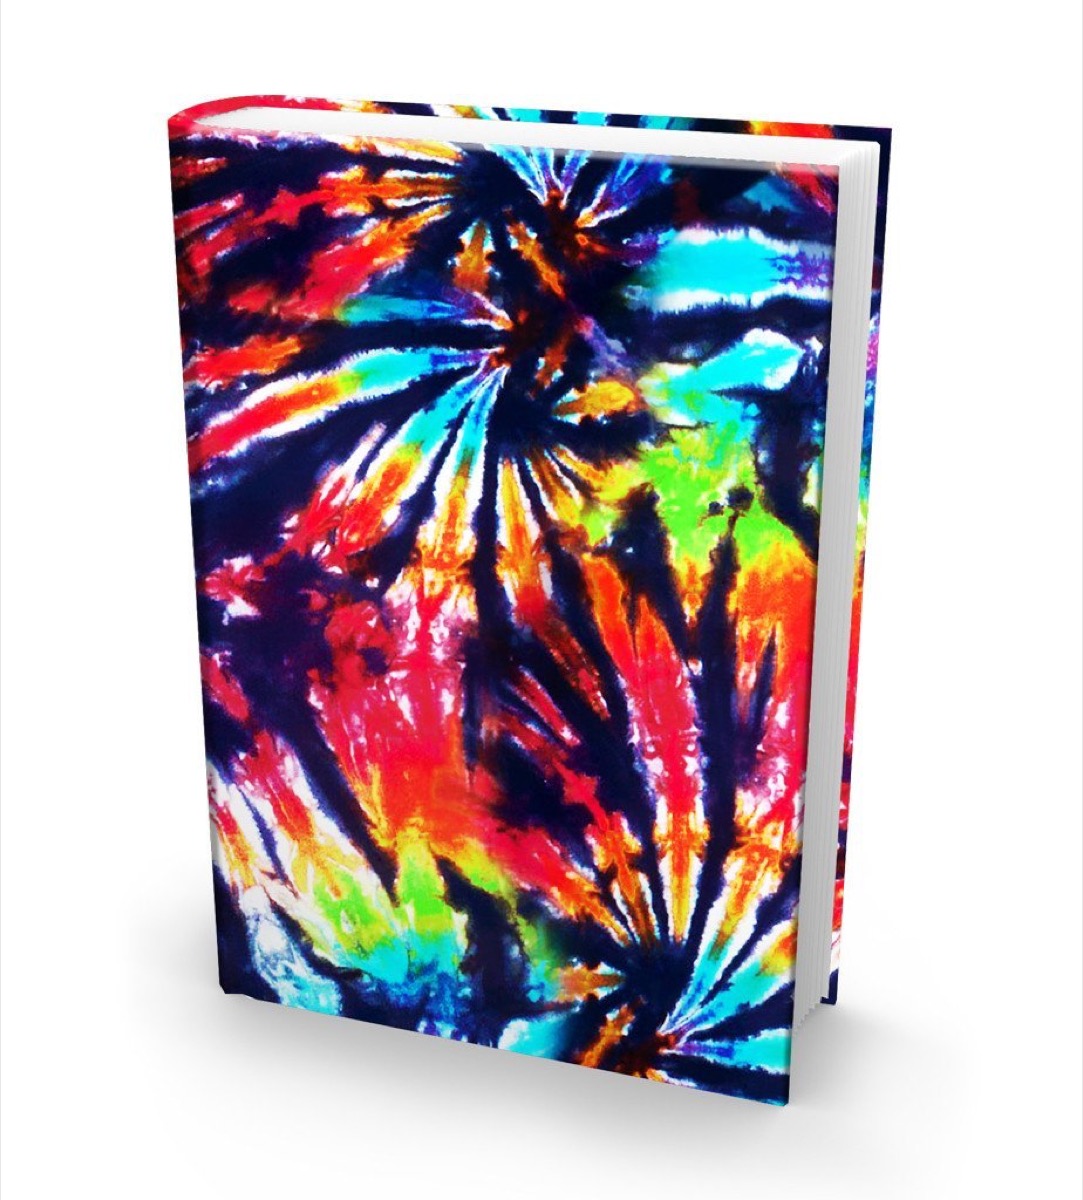 tie-dye book cover coolest school accessory every year